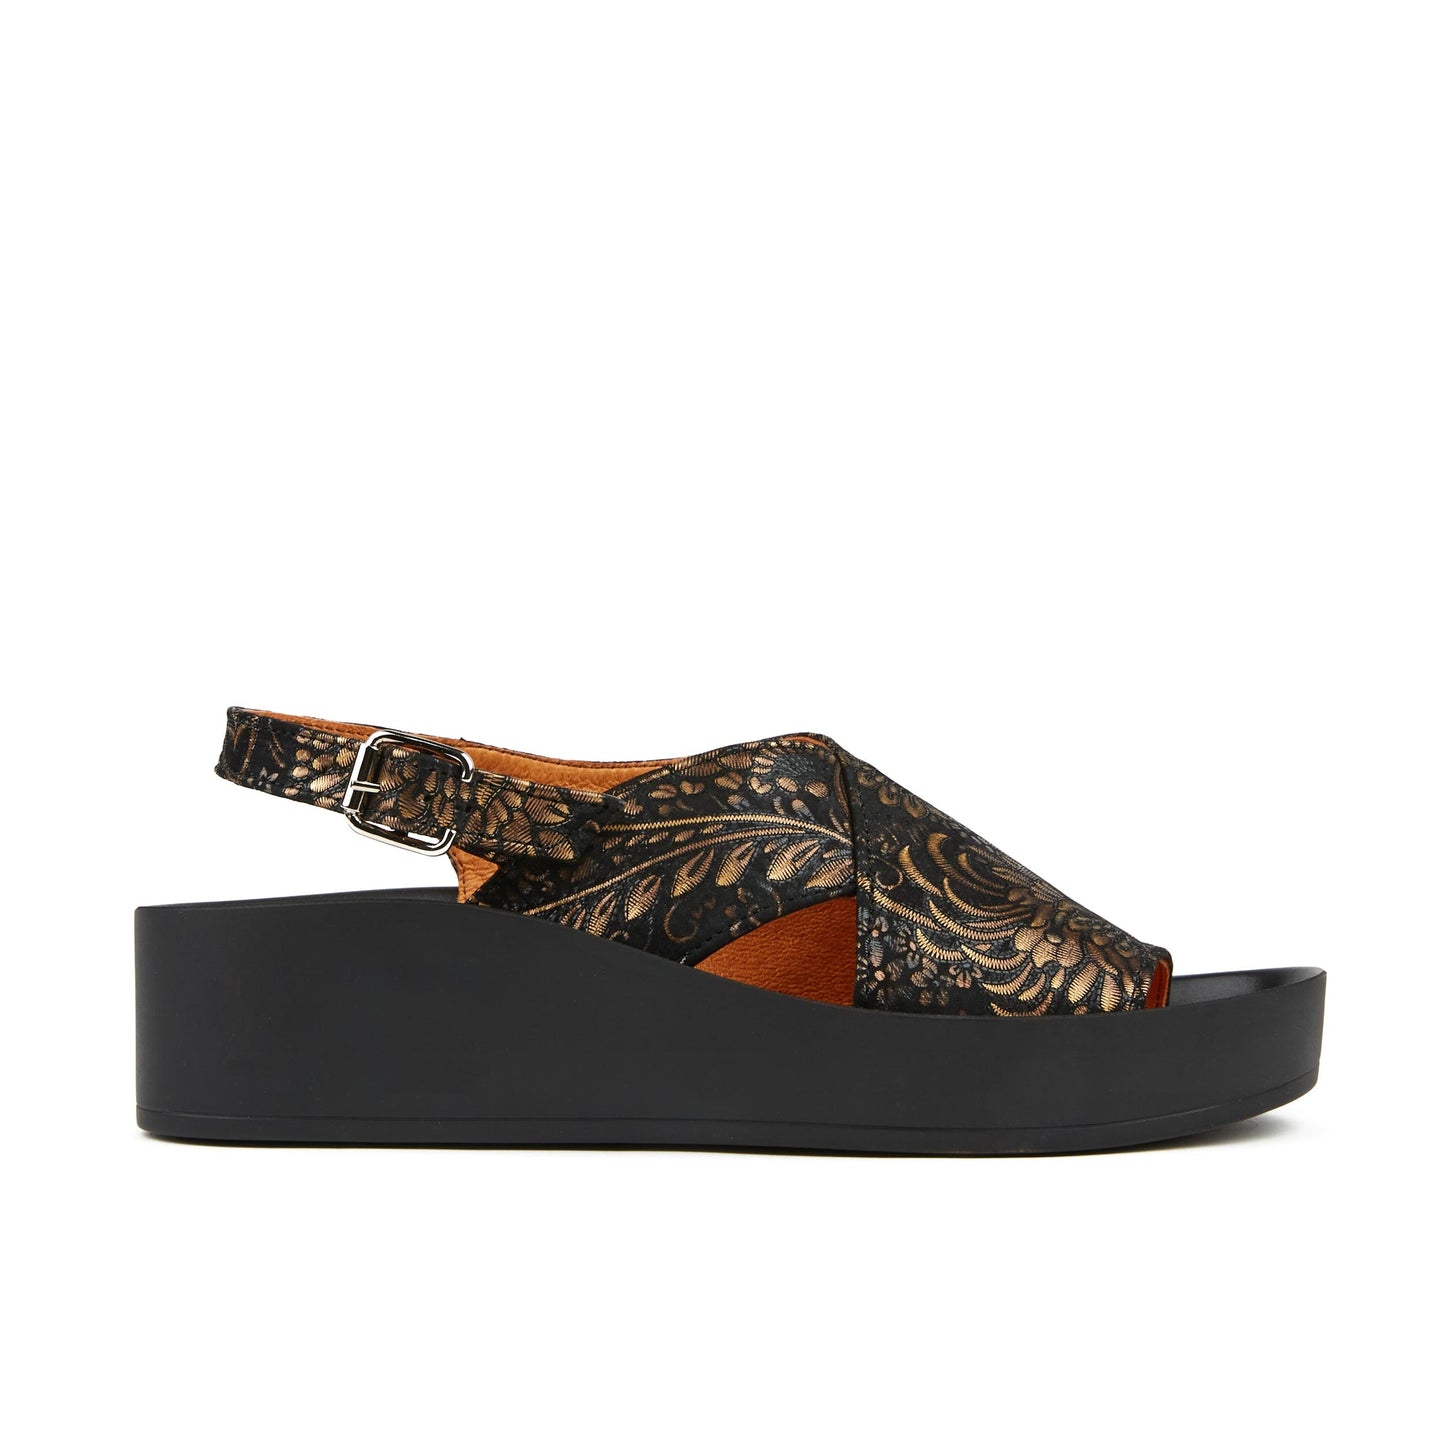 The Melody - Gold & Black Sandals Embassy London 